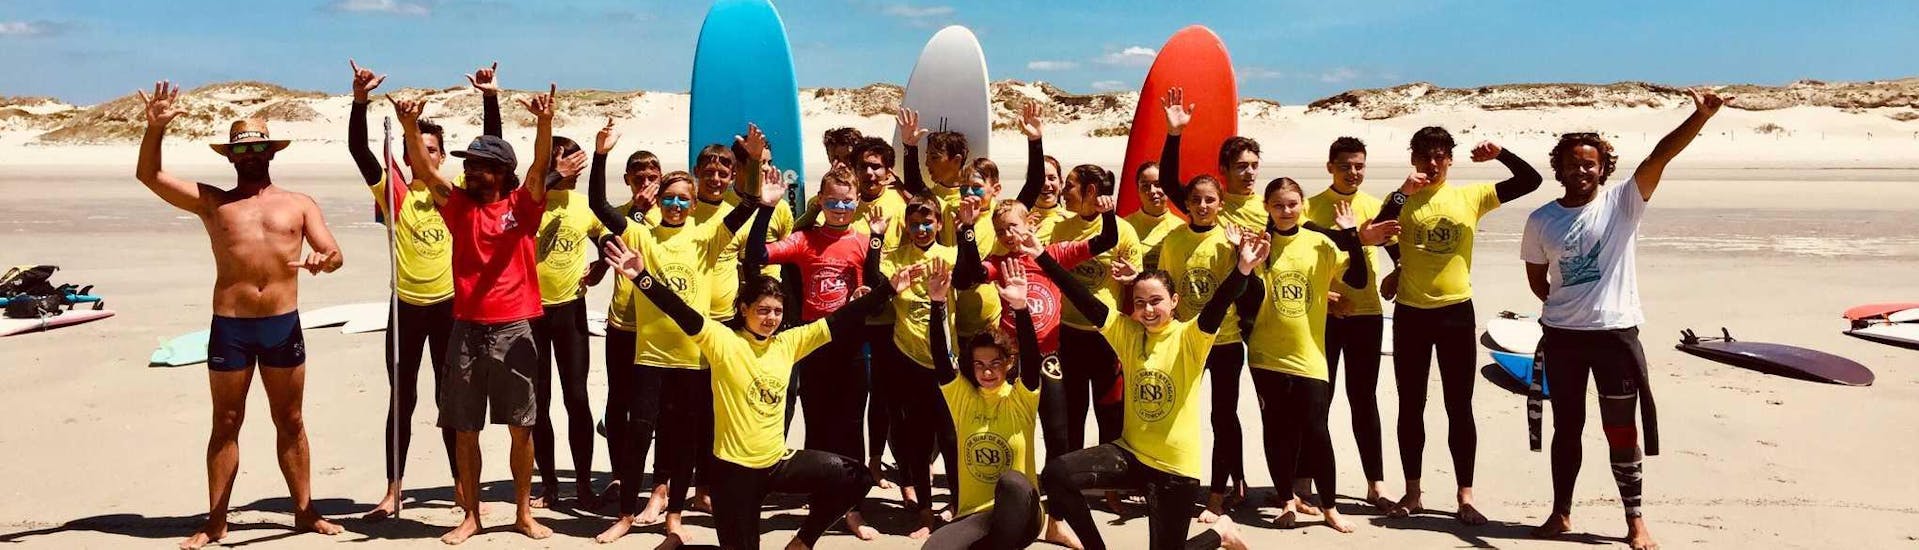 The group of surfer of ESB La Torche are regrouping to make a great photo after the surfing lessons in la pointe de la Torche.